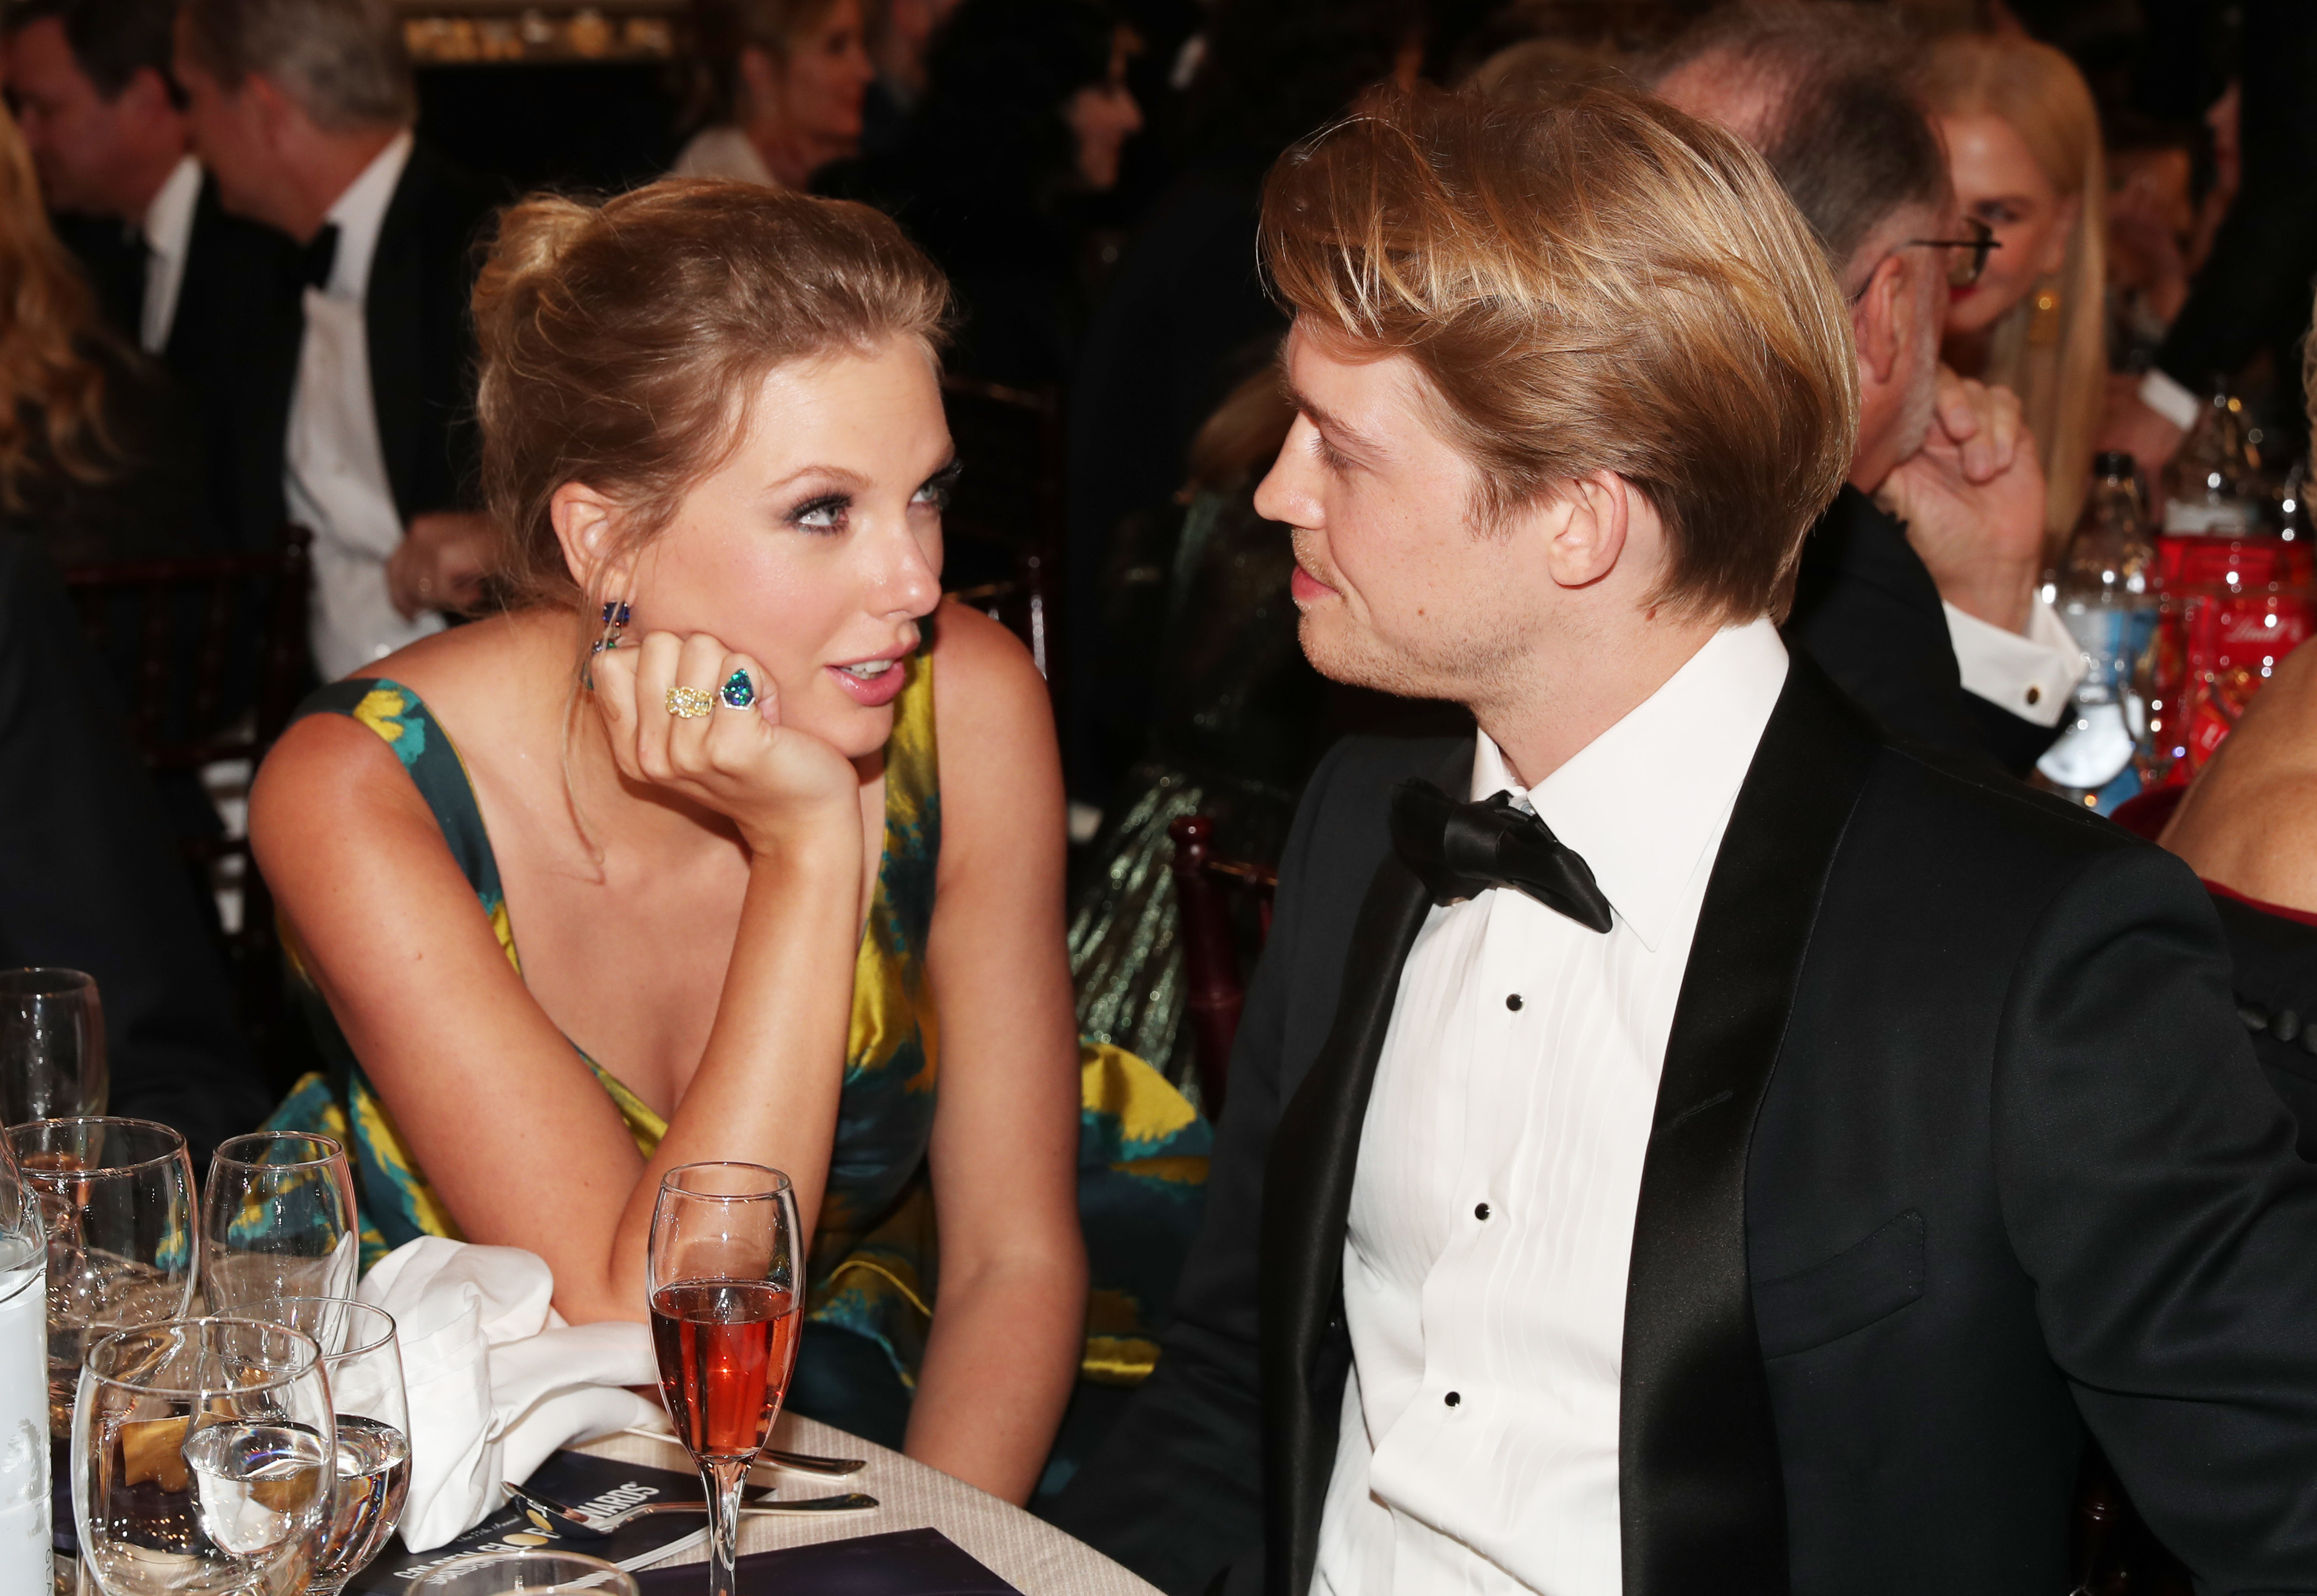 Close-up of Joe and Taylor at a table and looking at each other